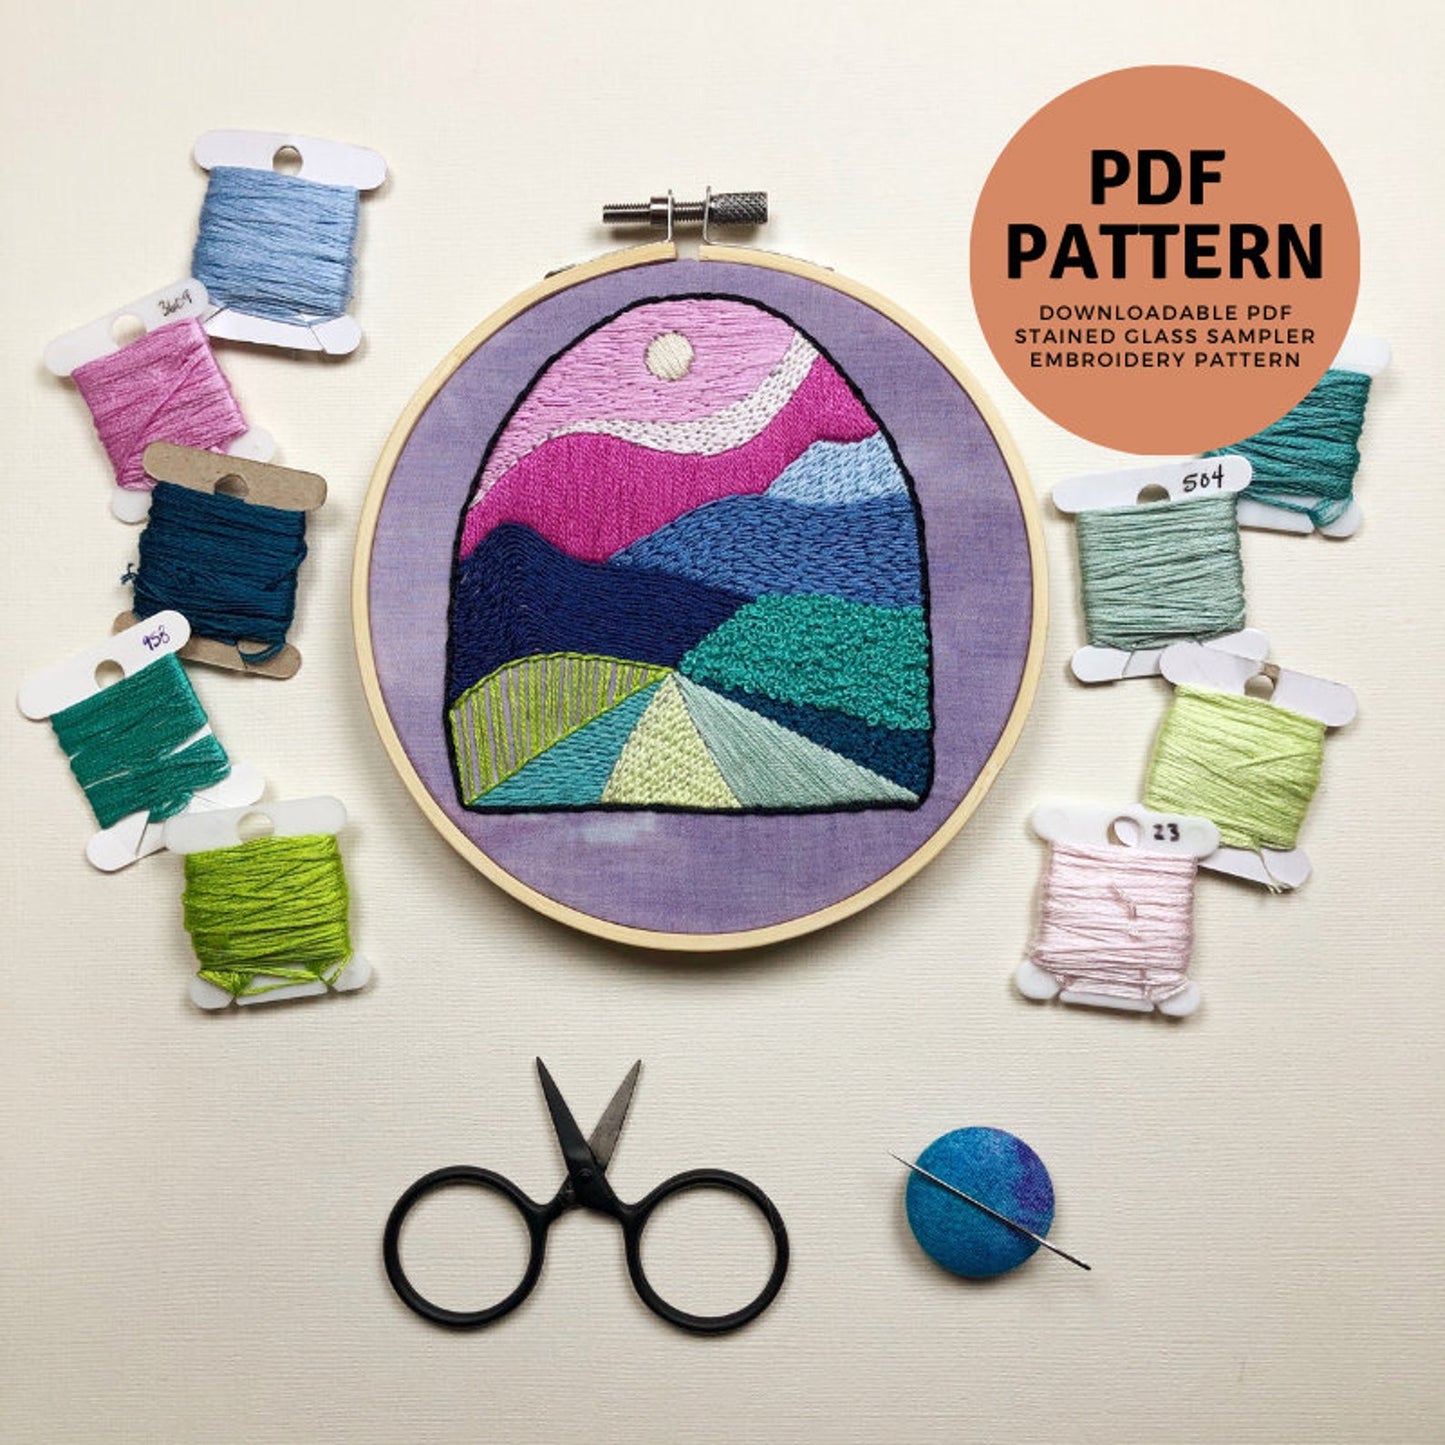 Stained Glass Sampler - Intermediate Hand Embroidery Pattern